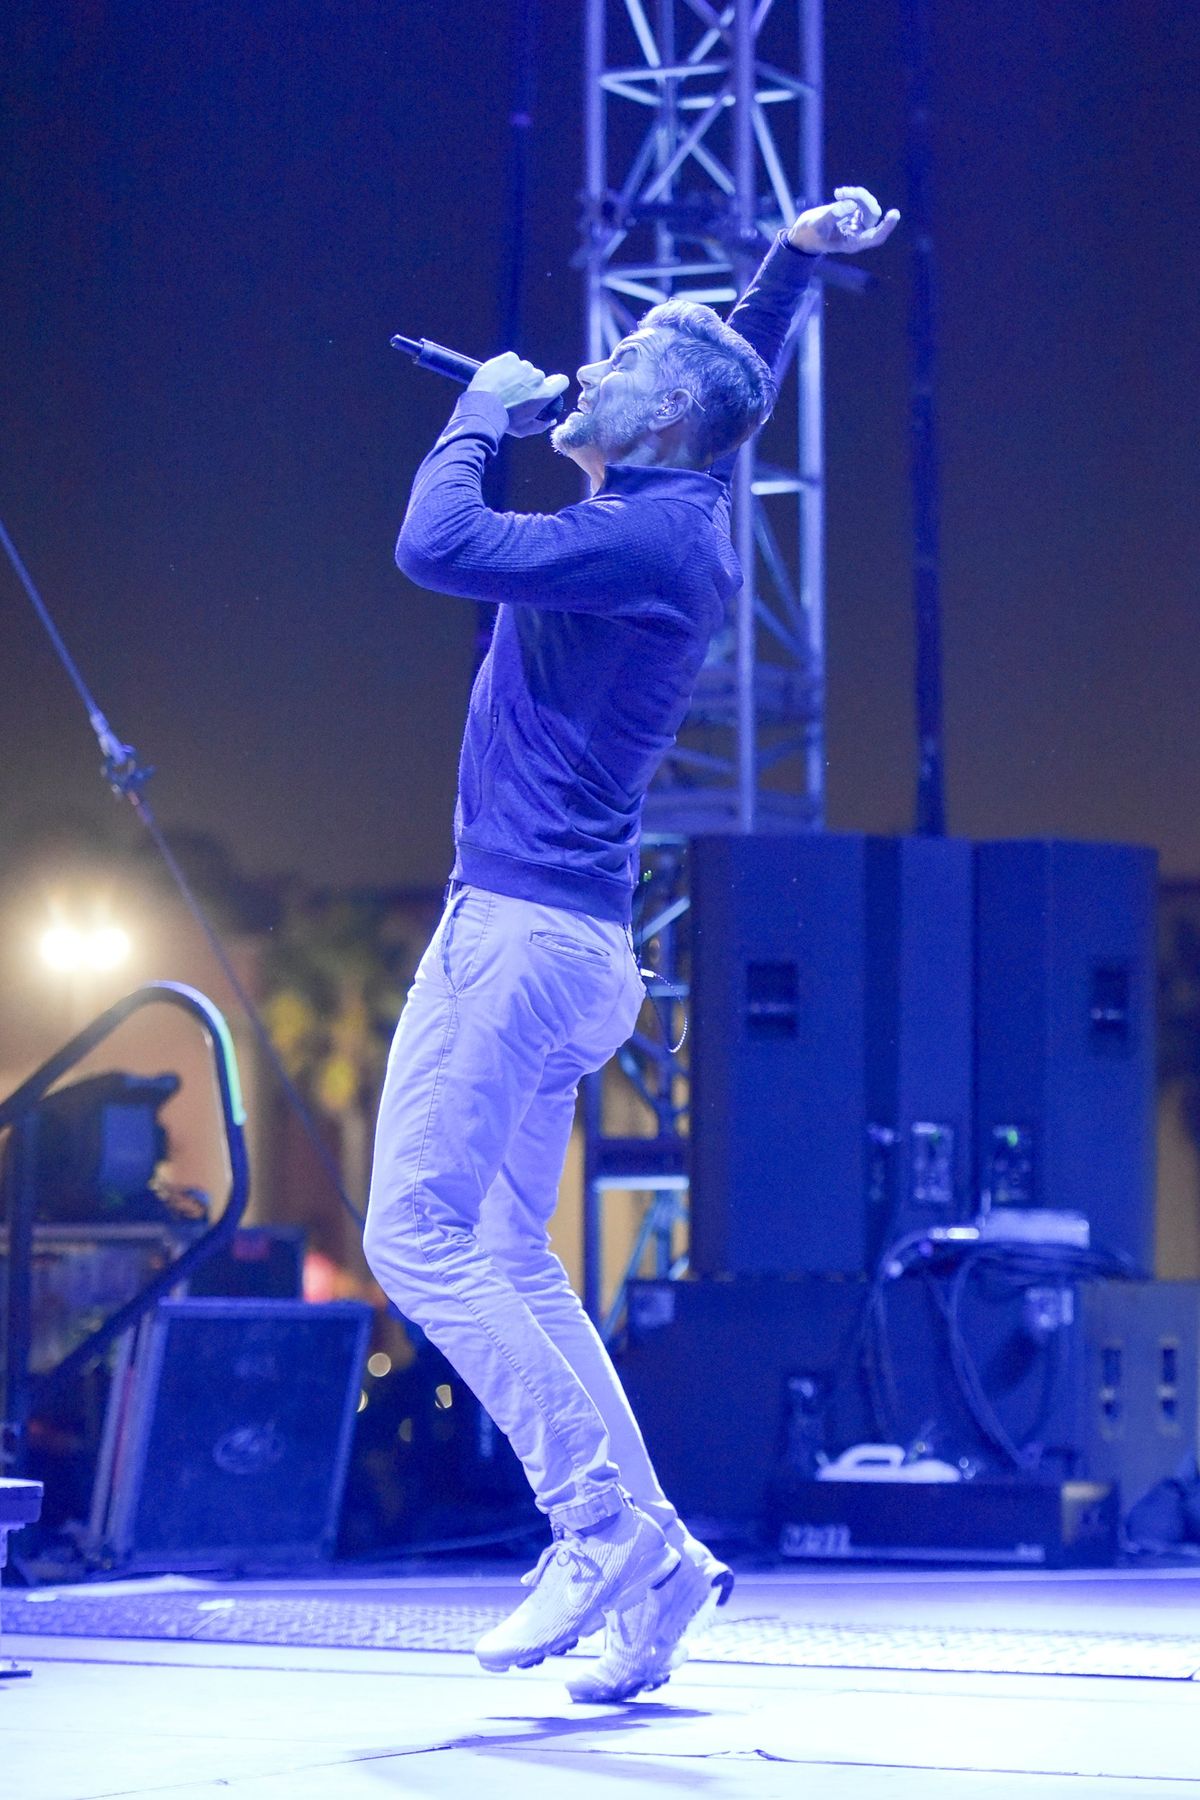 Nick Hexum of 311 performs during the Concerts in Your Car series at the Ventura County Fairgrounds on Nov. 14, 2020, in Ventura, Calif. 311 headlines Knitting Factory downtown on Sunday night.  (Richard Shotwell/Invision/AP)